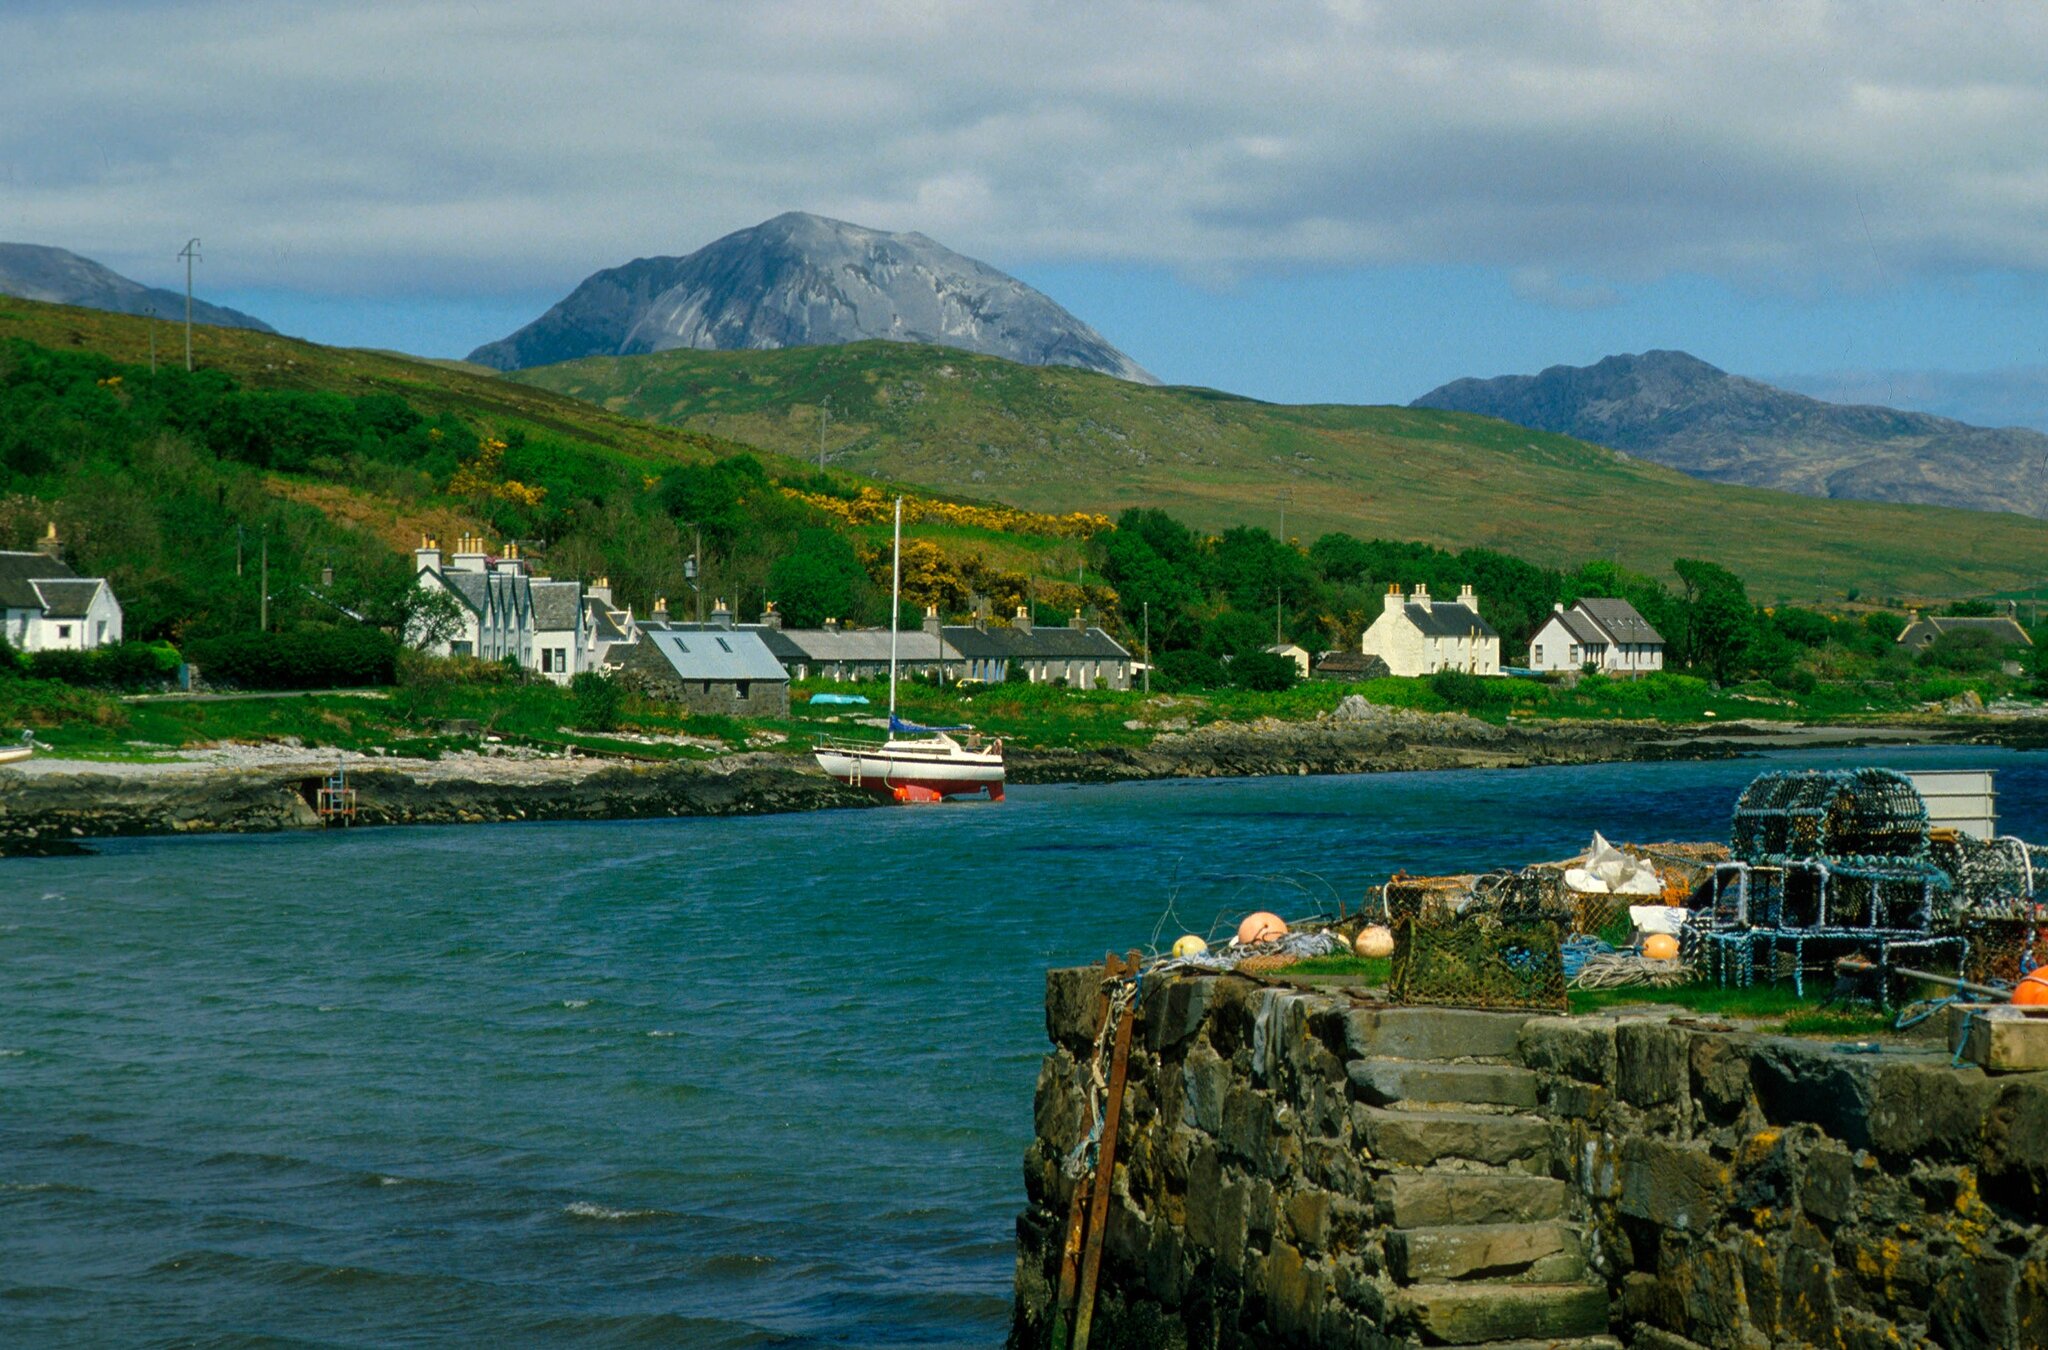 Looking across the pier to the small port of Craighouse on the east coast of the island.